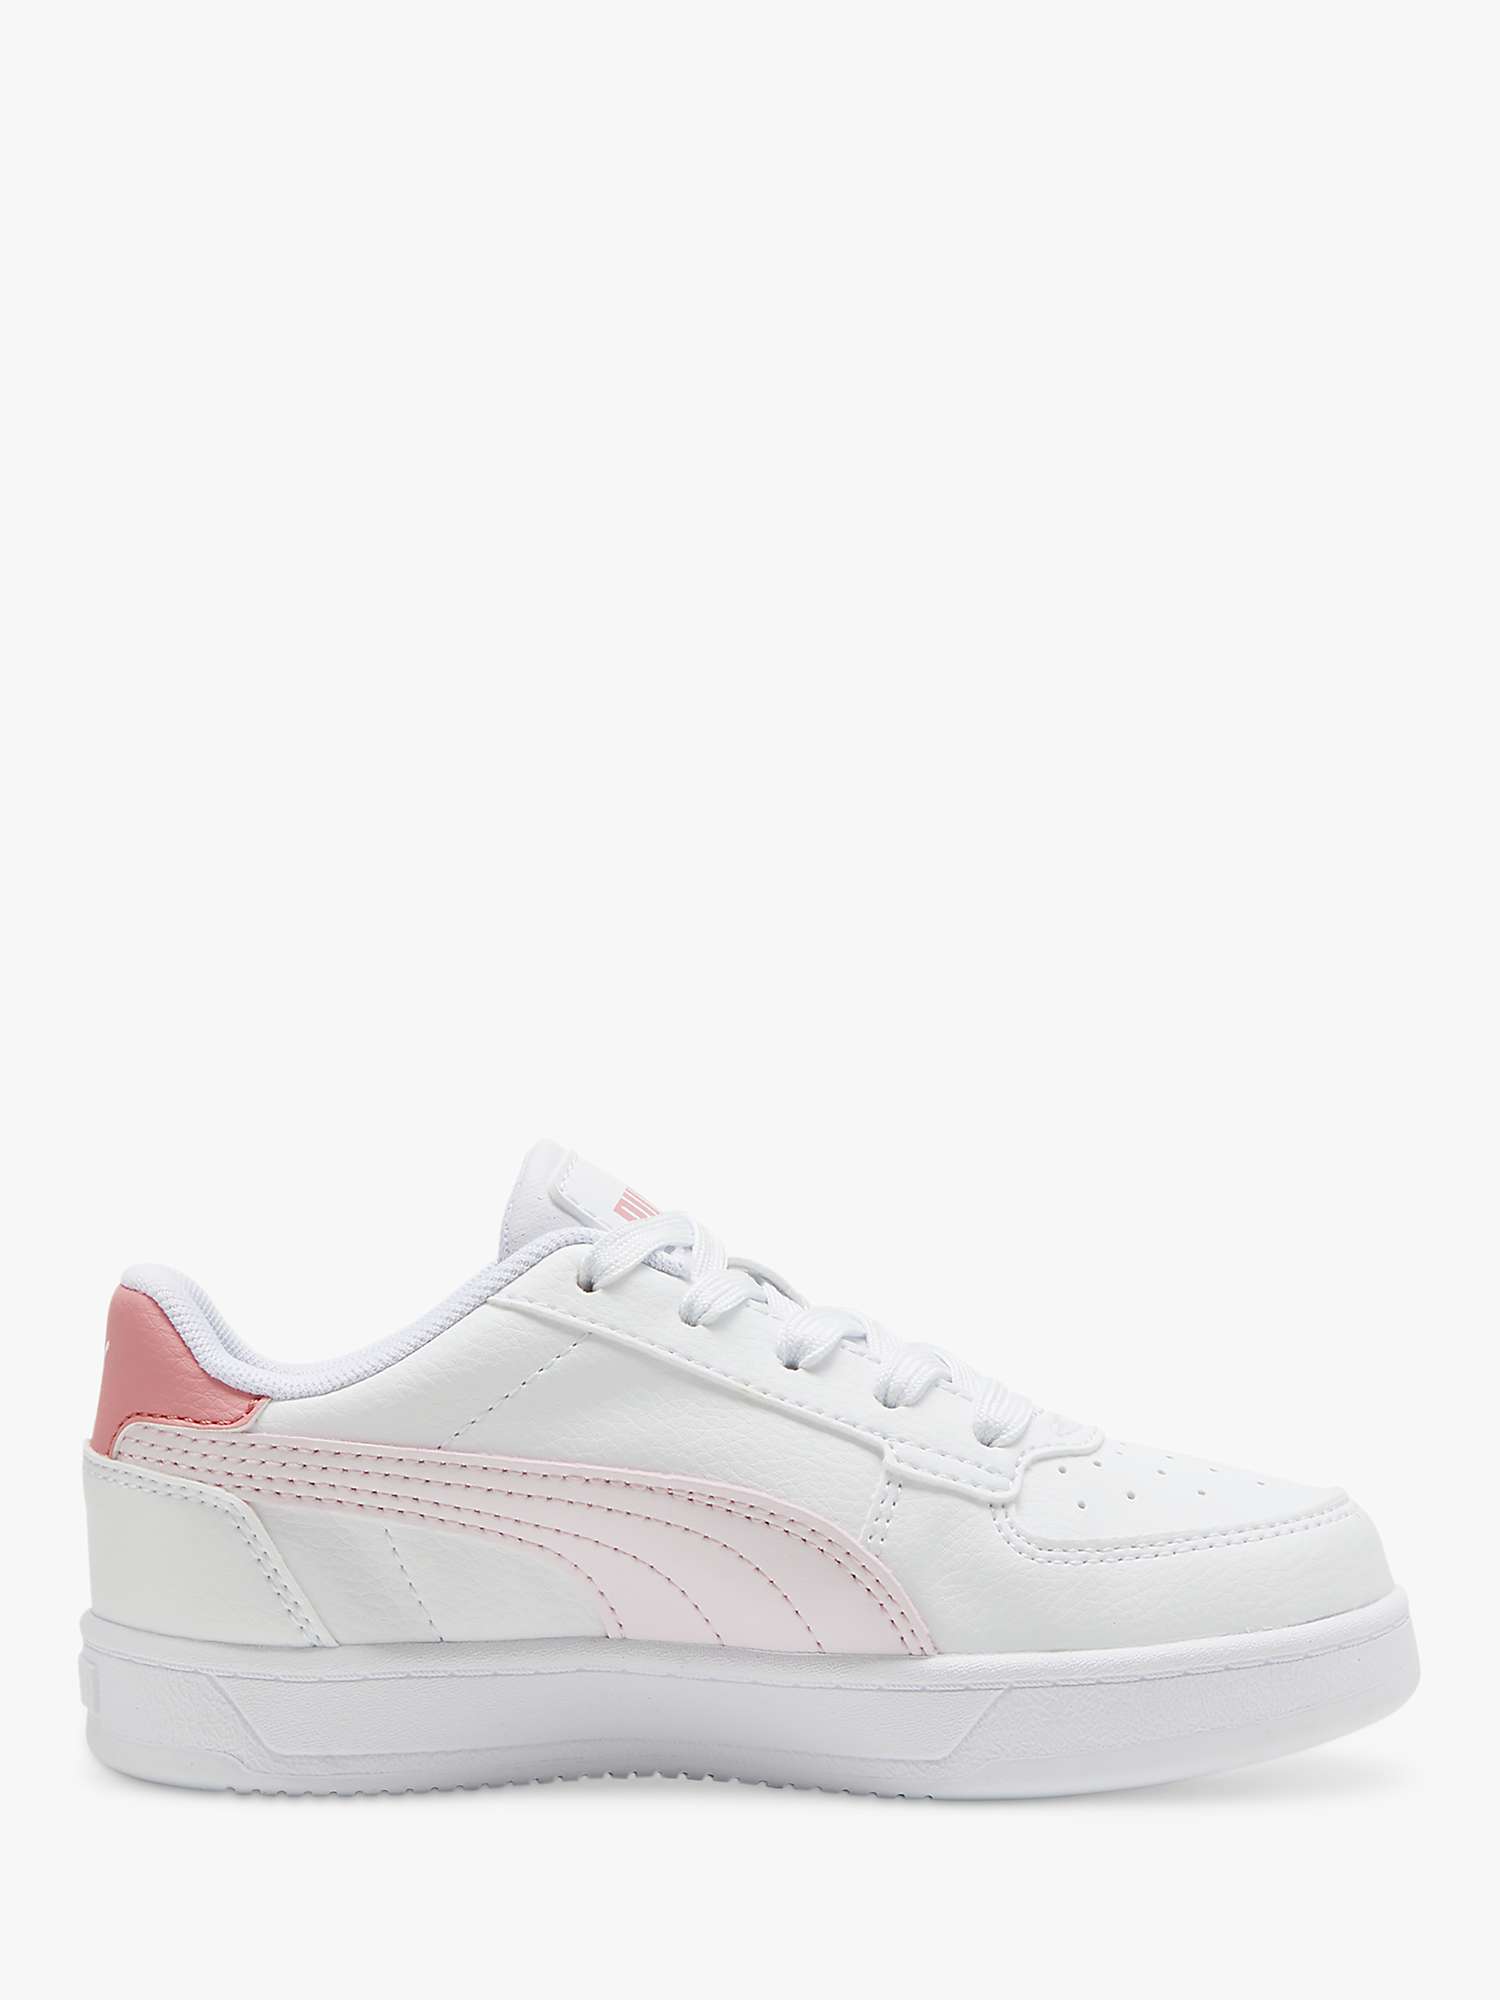 Buy PUMA Kids' Caven 2.0 Trainers, White/Pink Online at johnlewis.com